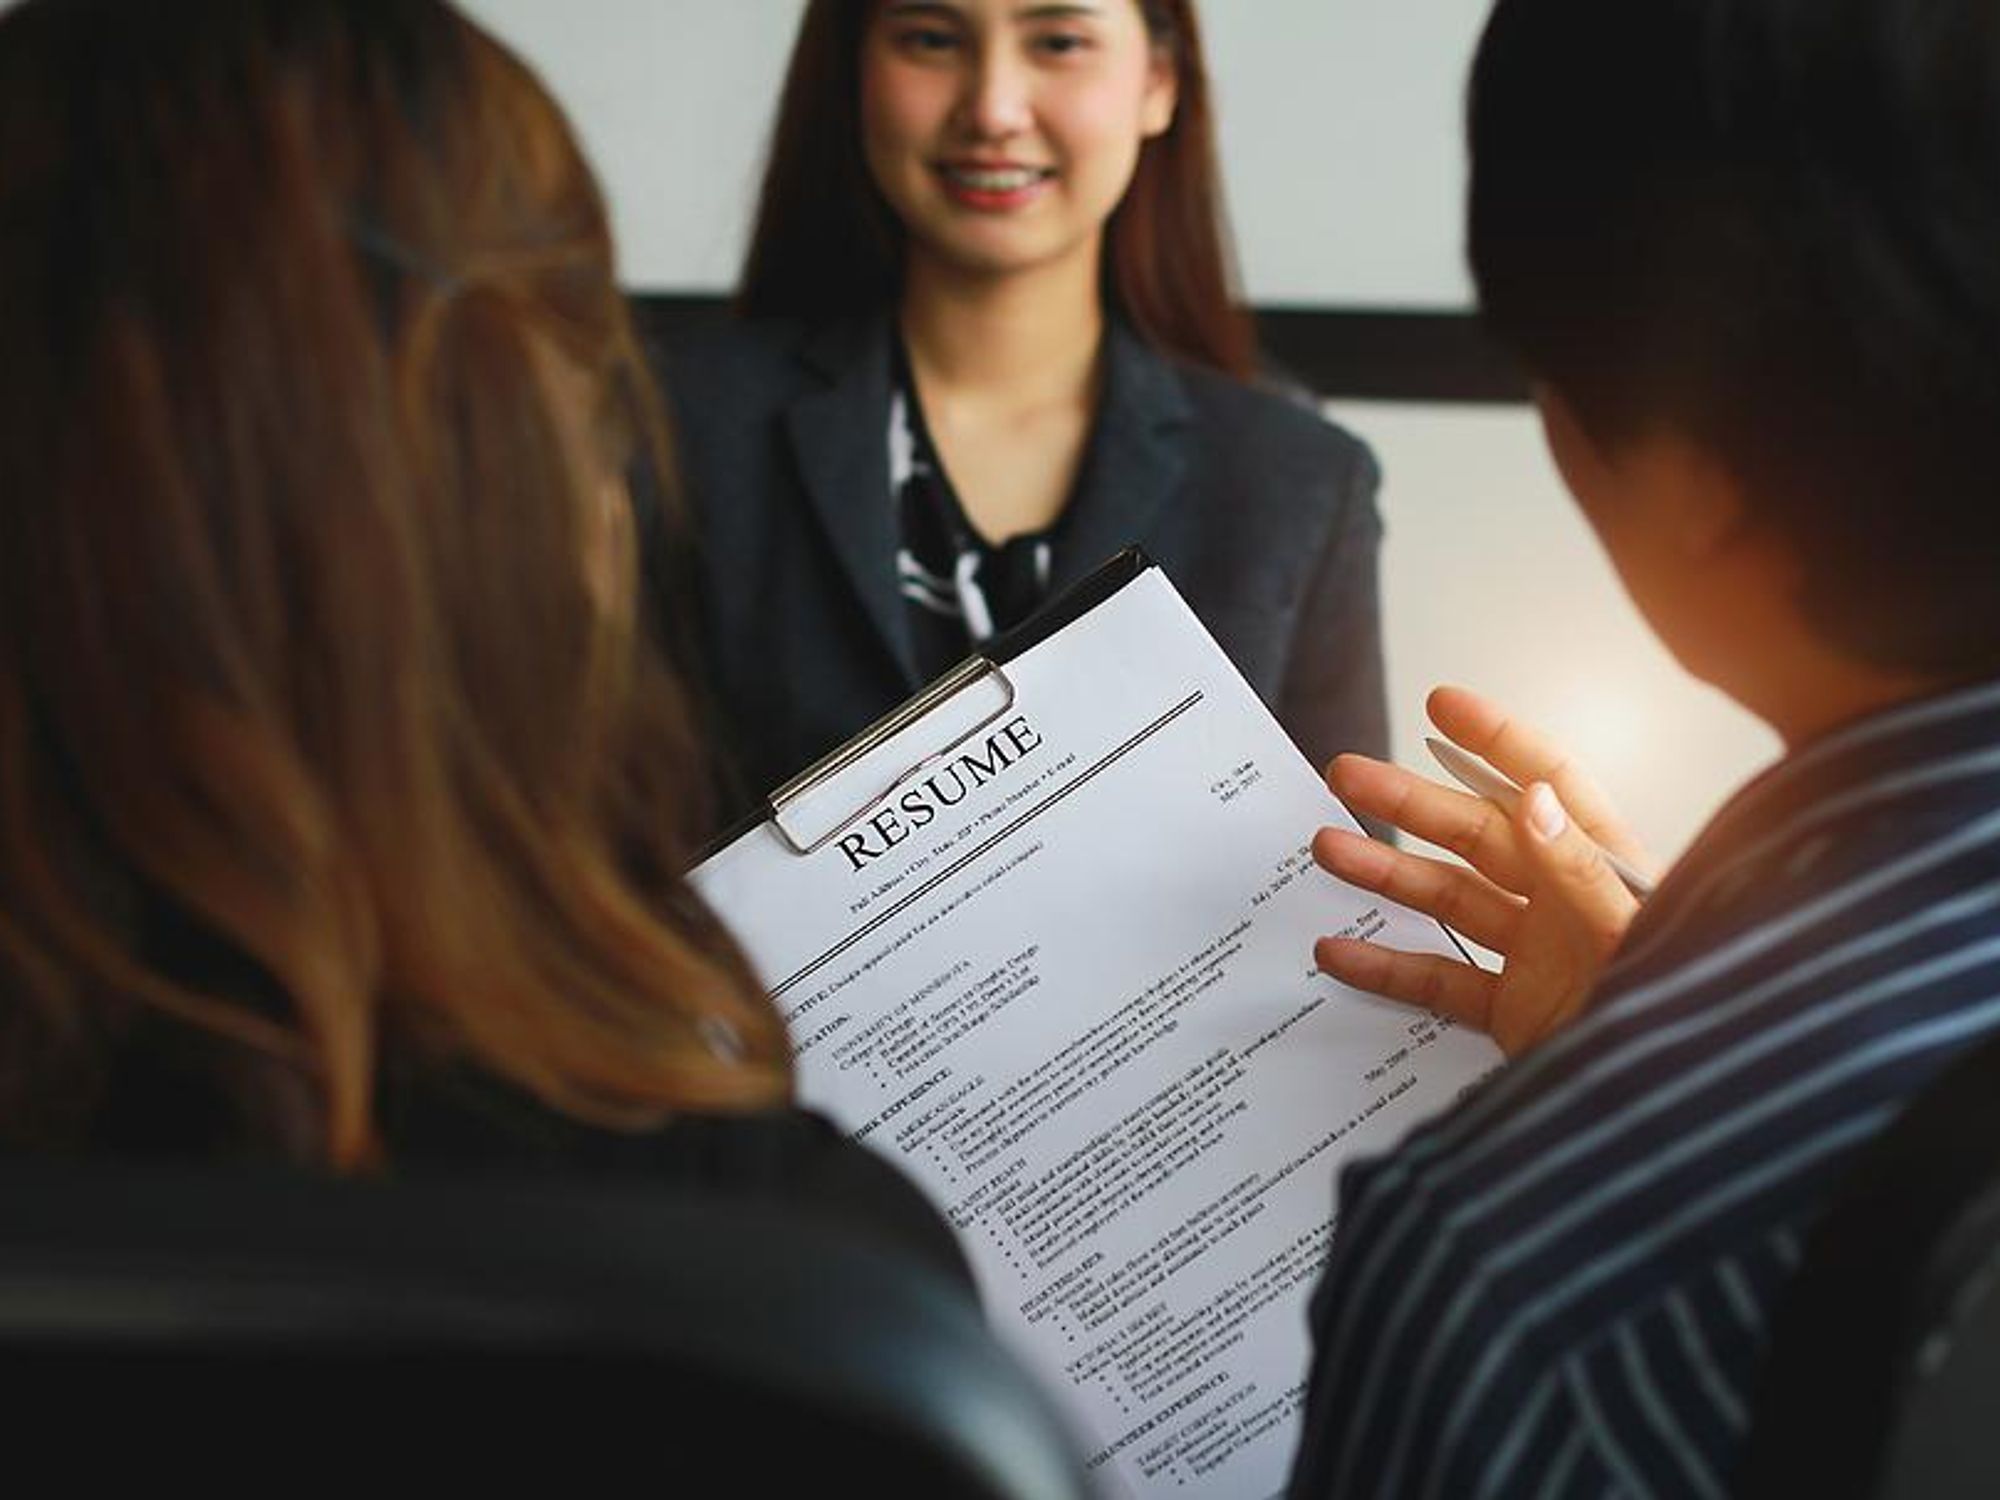 Hiring managers look at a job candidate's resume during an interview